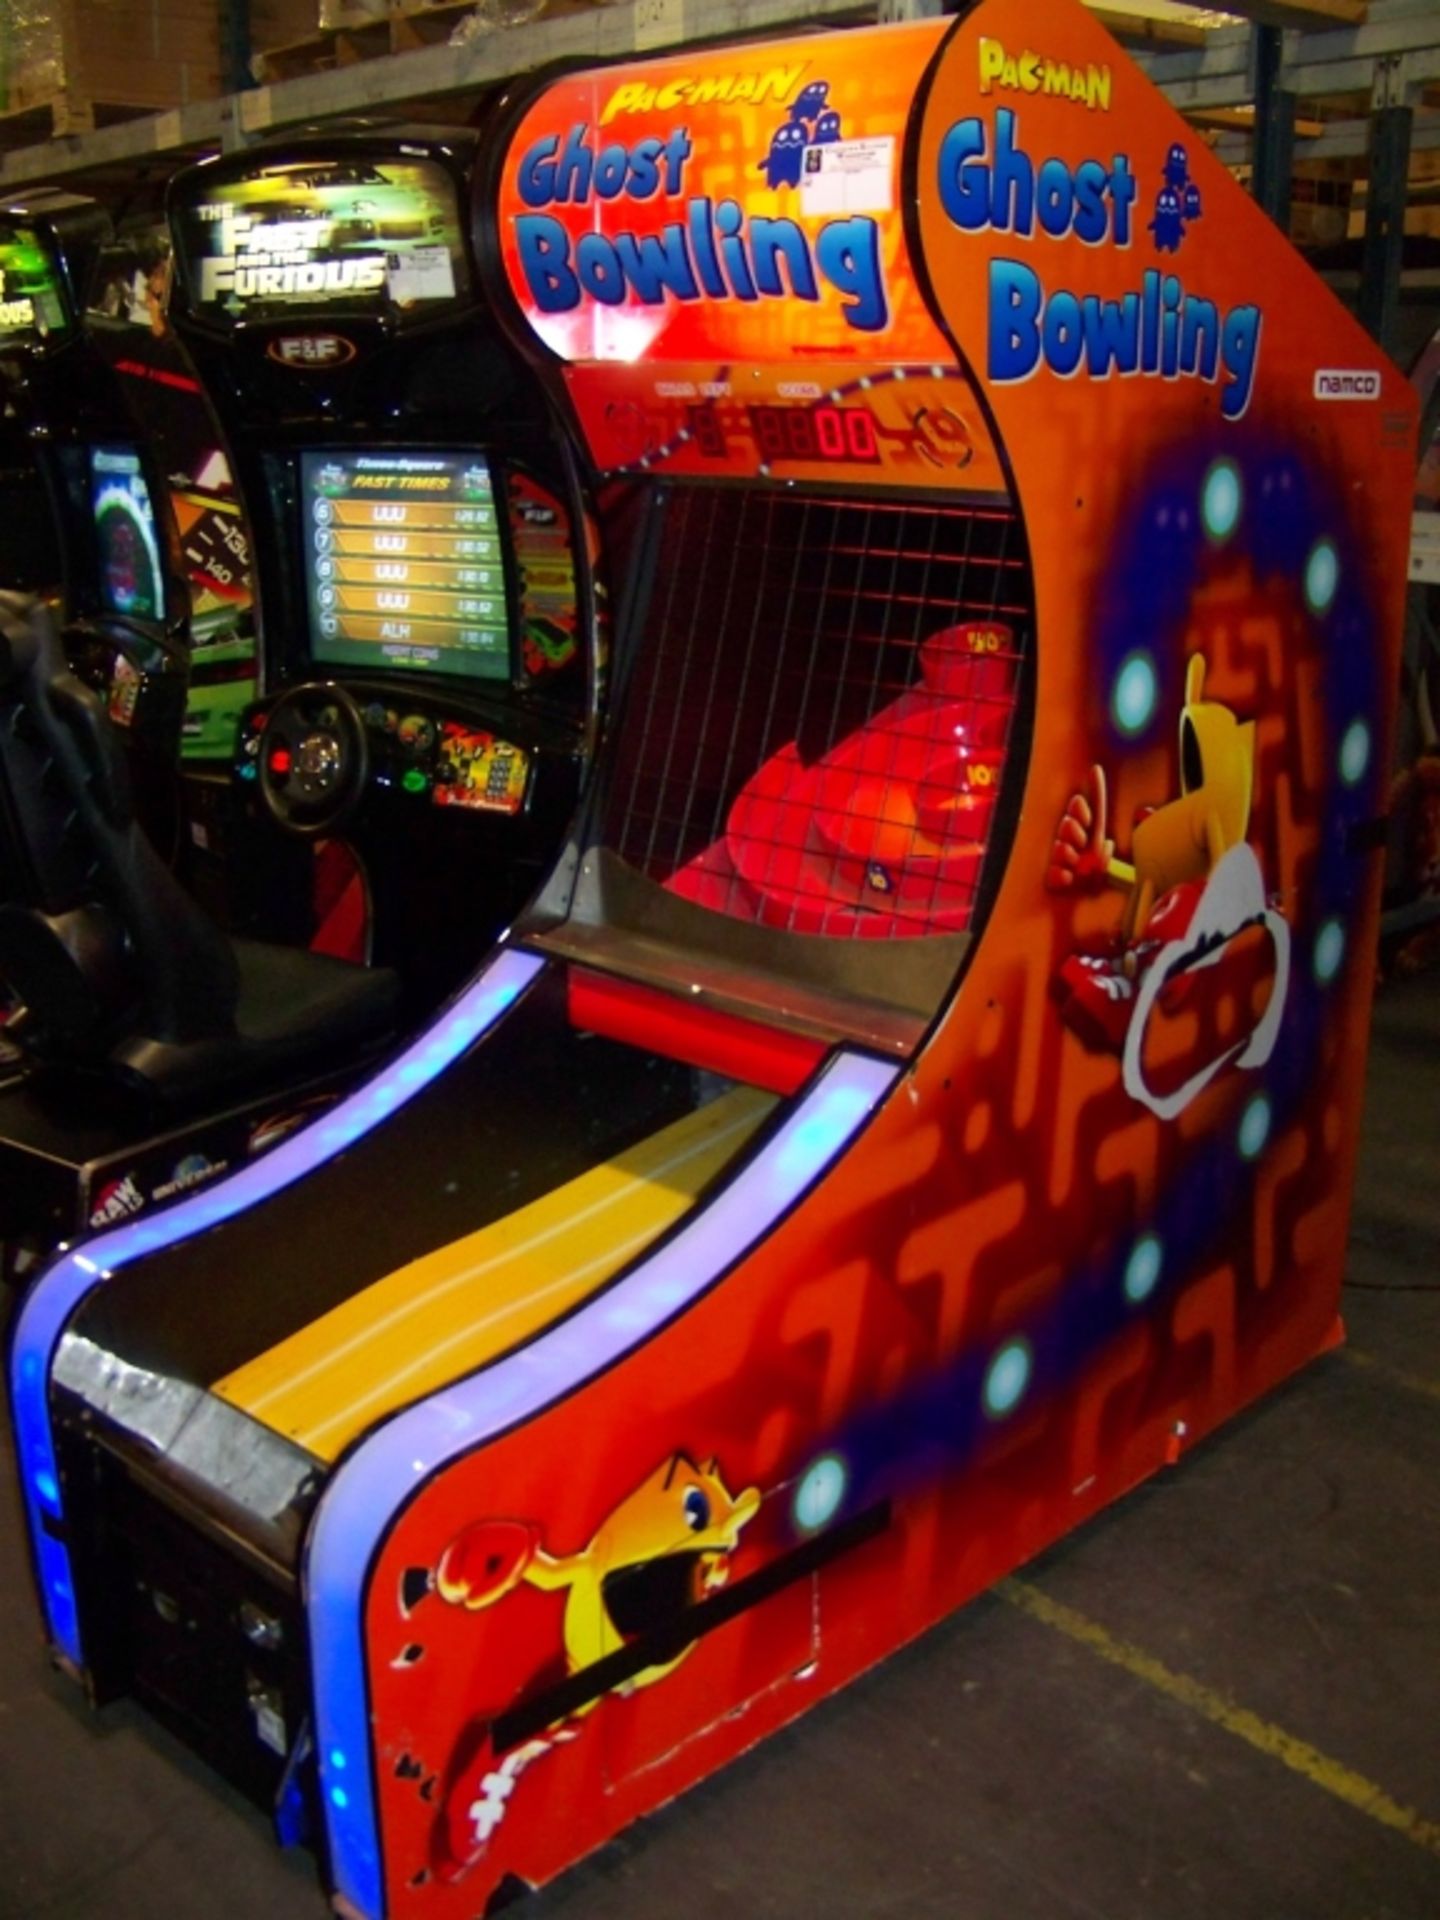 PACMAN GHOST BOWLING REDEMPTION GAME NAMCO - Image 2 of 6